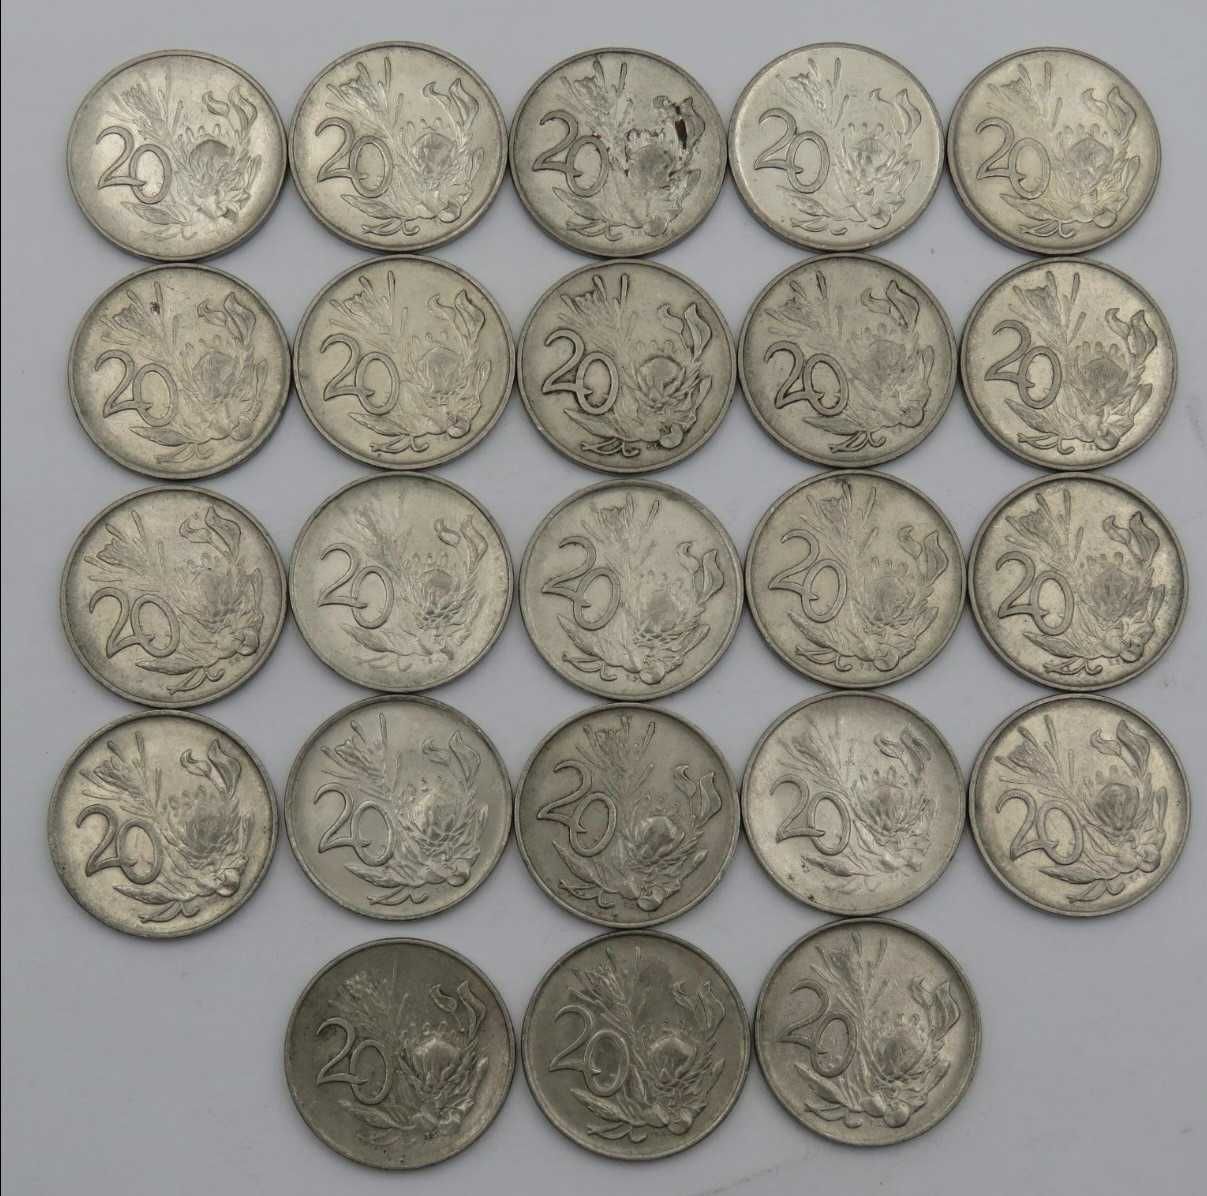 Lot of 23 South African 20 Cent coins between 1965 and 1990